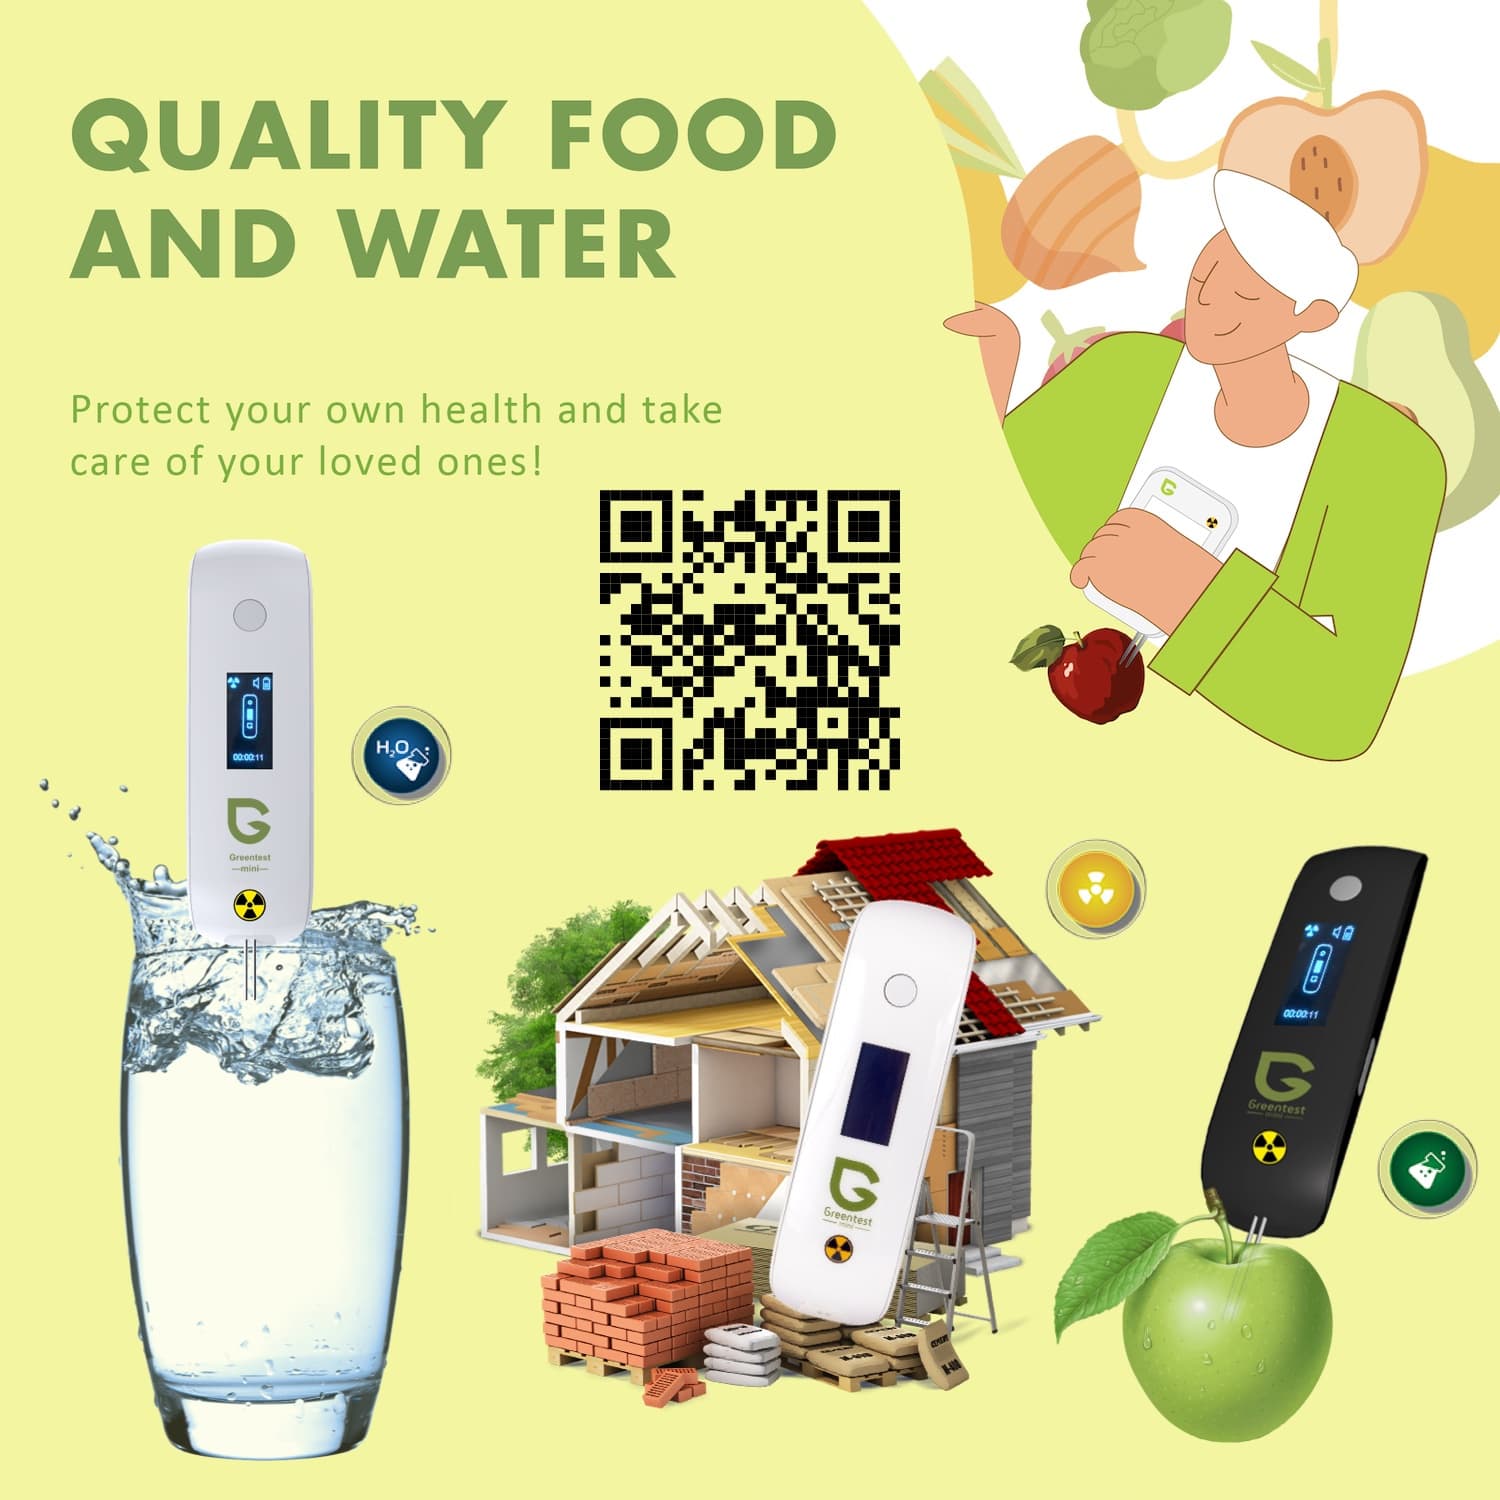 GreenTest Mini ECO - Quality Food and Water - small portable Nitrate, Water and Radiation detector